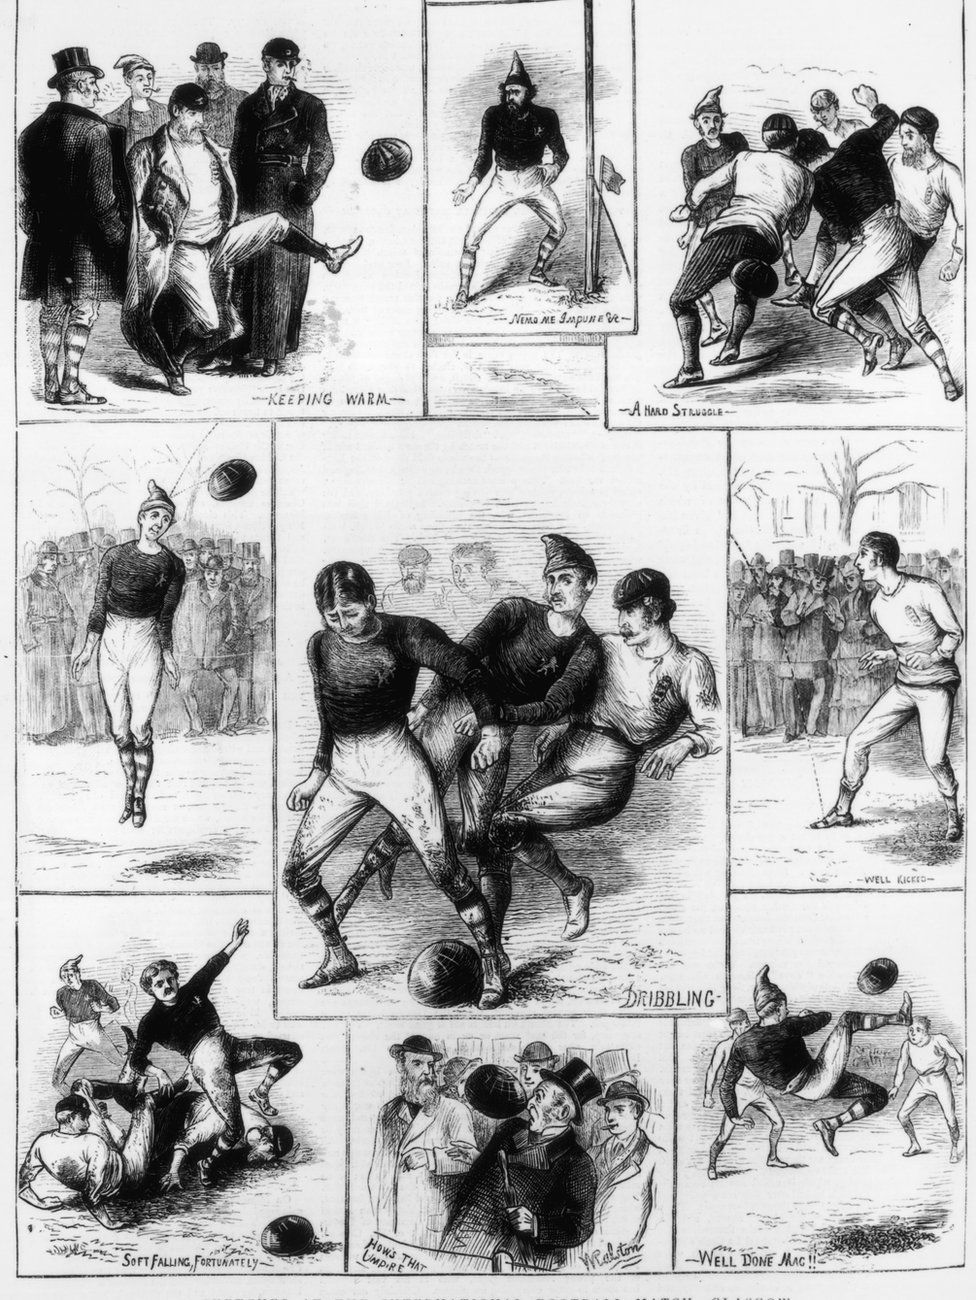 30th November 1872: Scenes from an International football match between England and Scotland in Partick, Glasgow, Scotland. The match resulted in a 0-0 draw. Original Artist: W. Ralston. Published in The Graphic - 14th December 1872 (Photo by Hulton Archive/Getty Images)